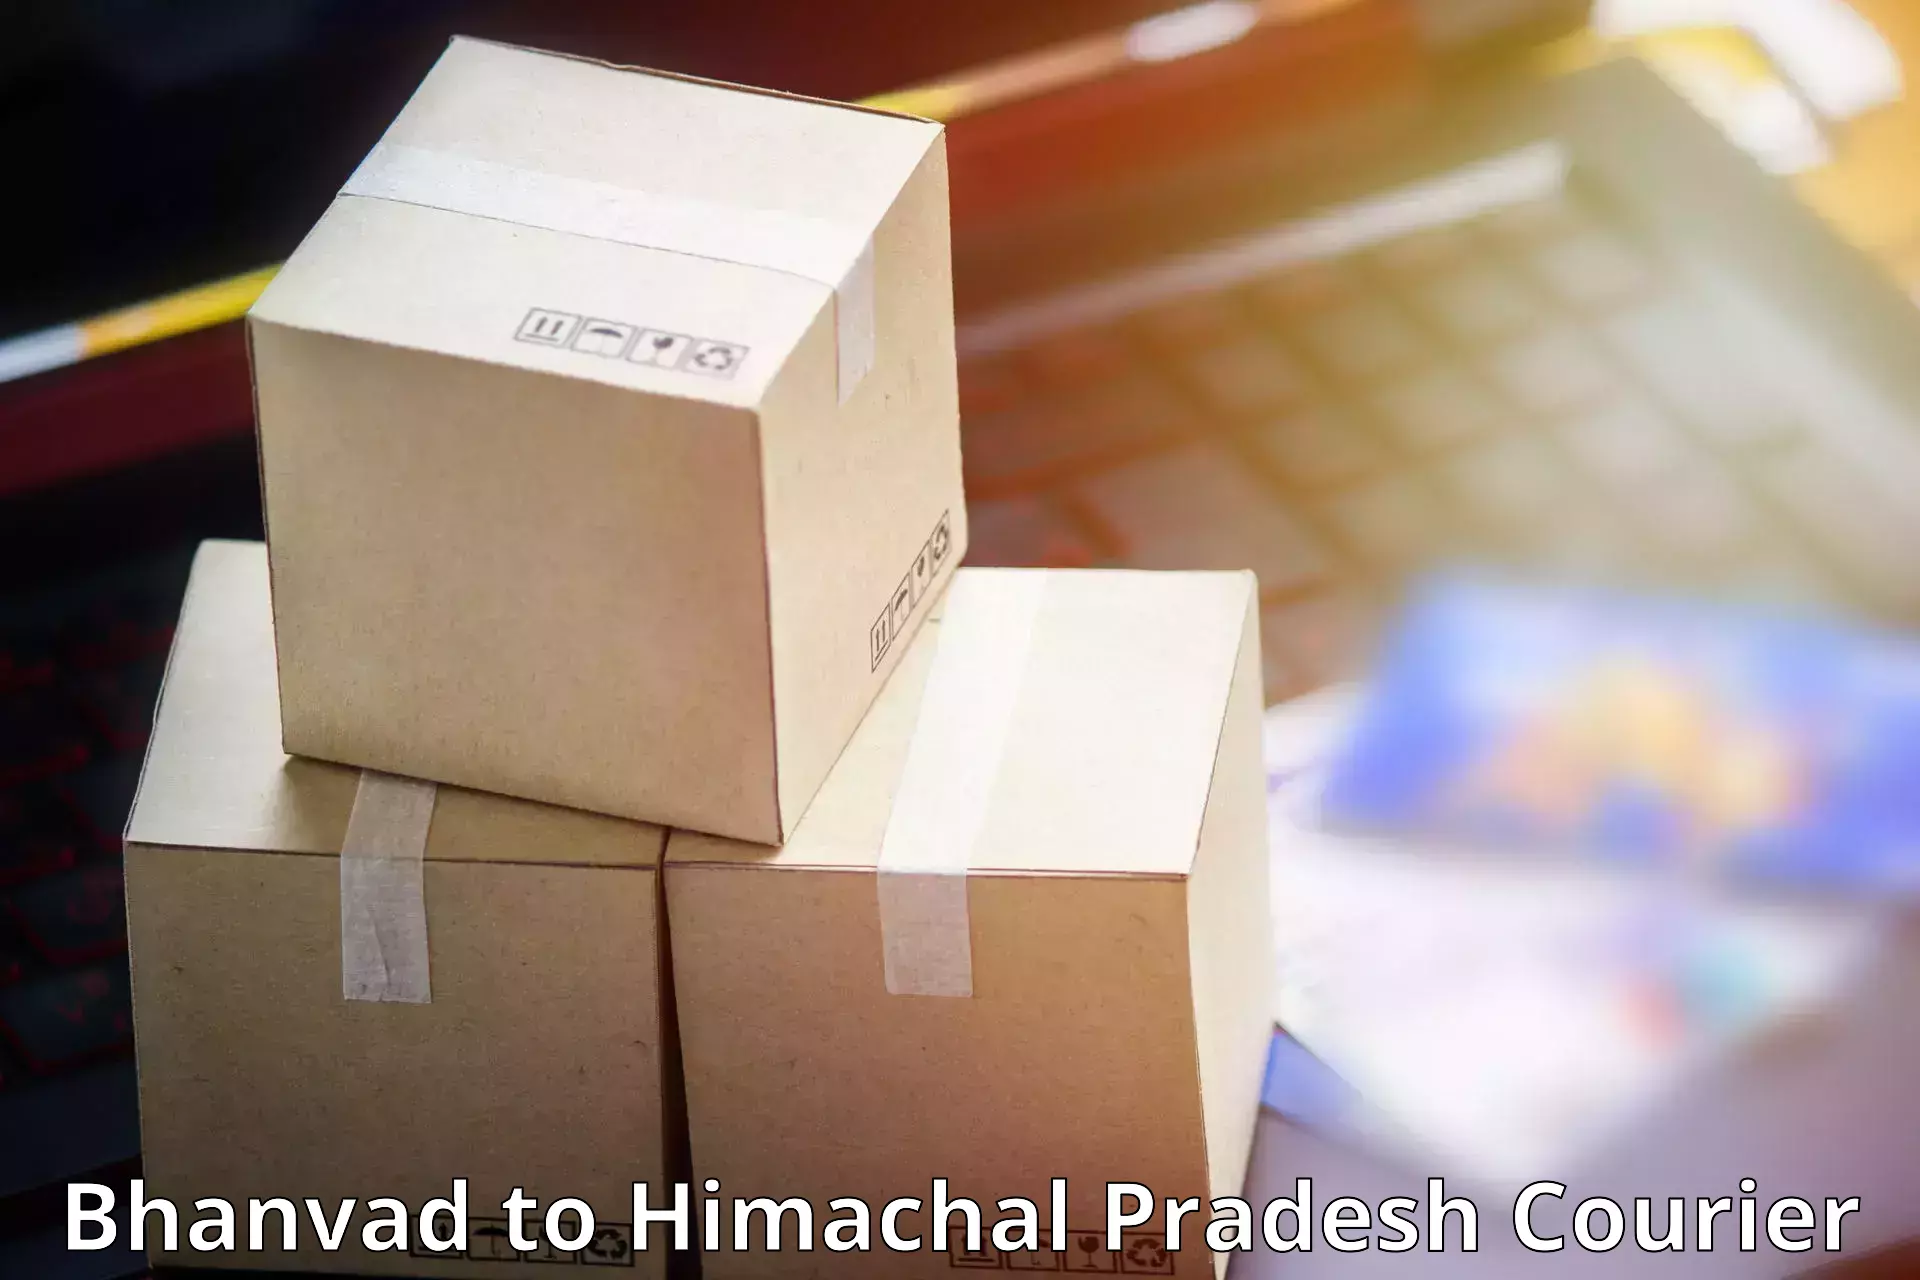 Courier service booking Bhanvad to YS Parmar University of Horticulture and Forestry Solan